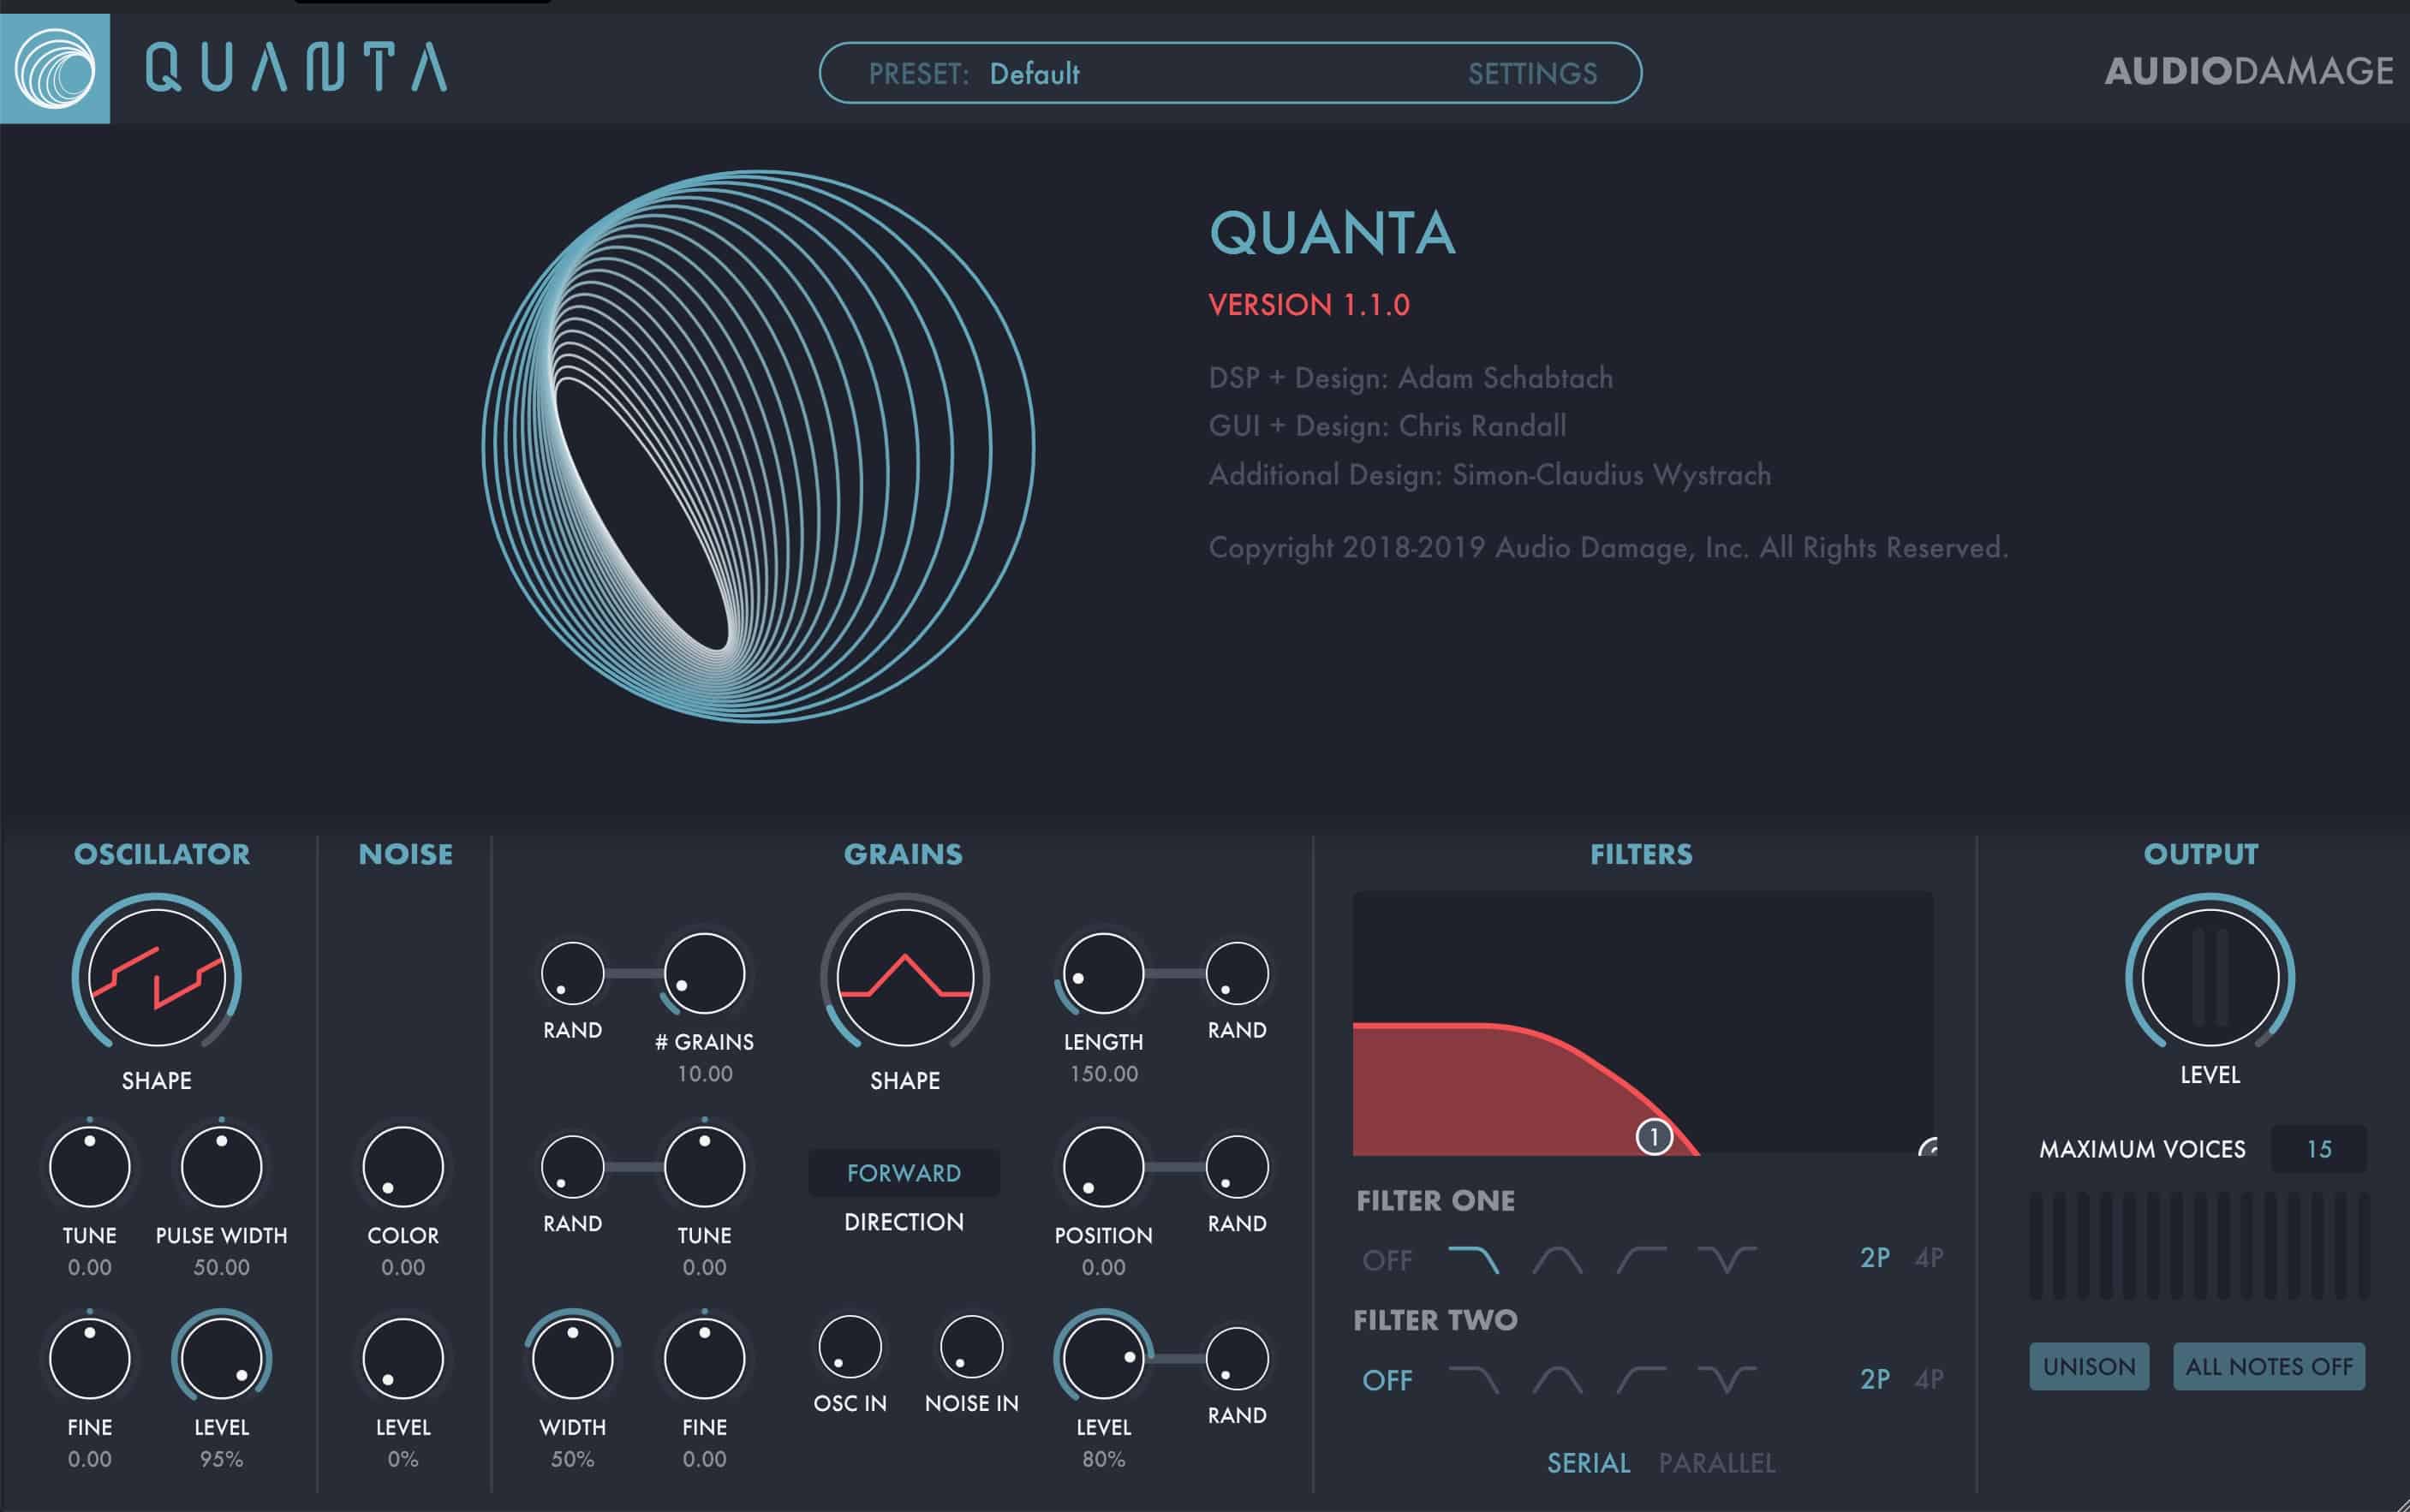 Quanta by Audio Damage Updated Version V1.1.0